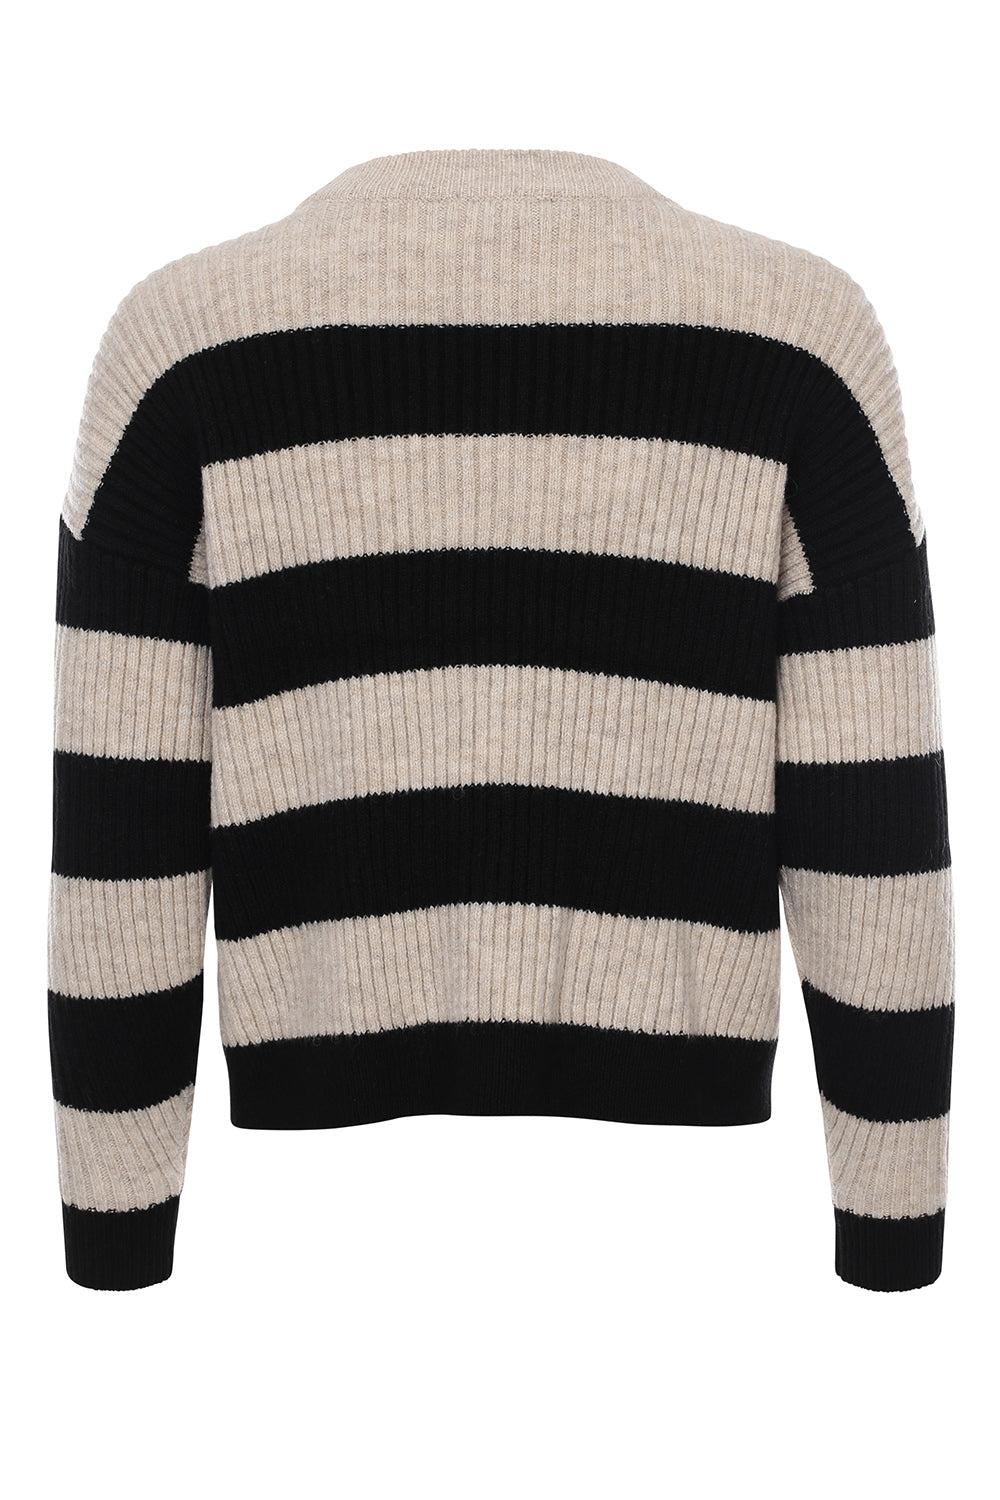 Looxs Ladies Knitted Striped Pullover